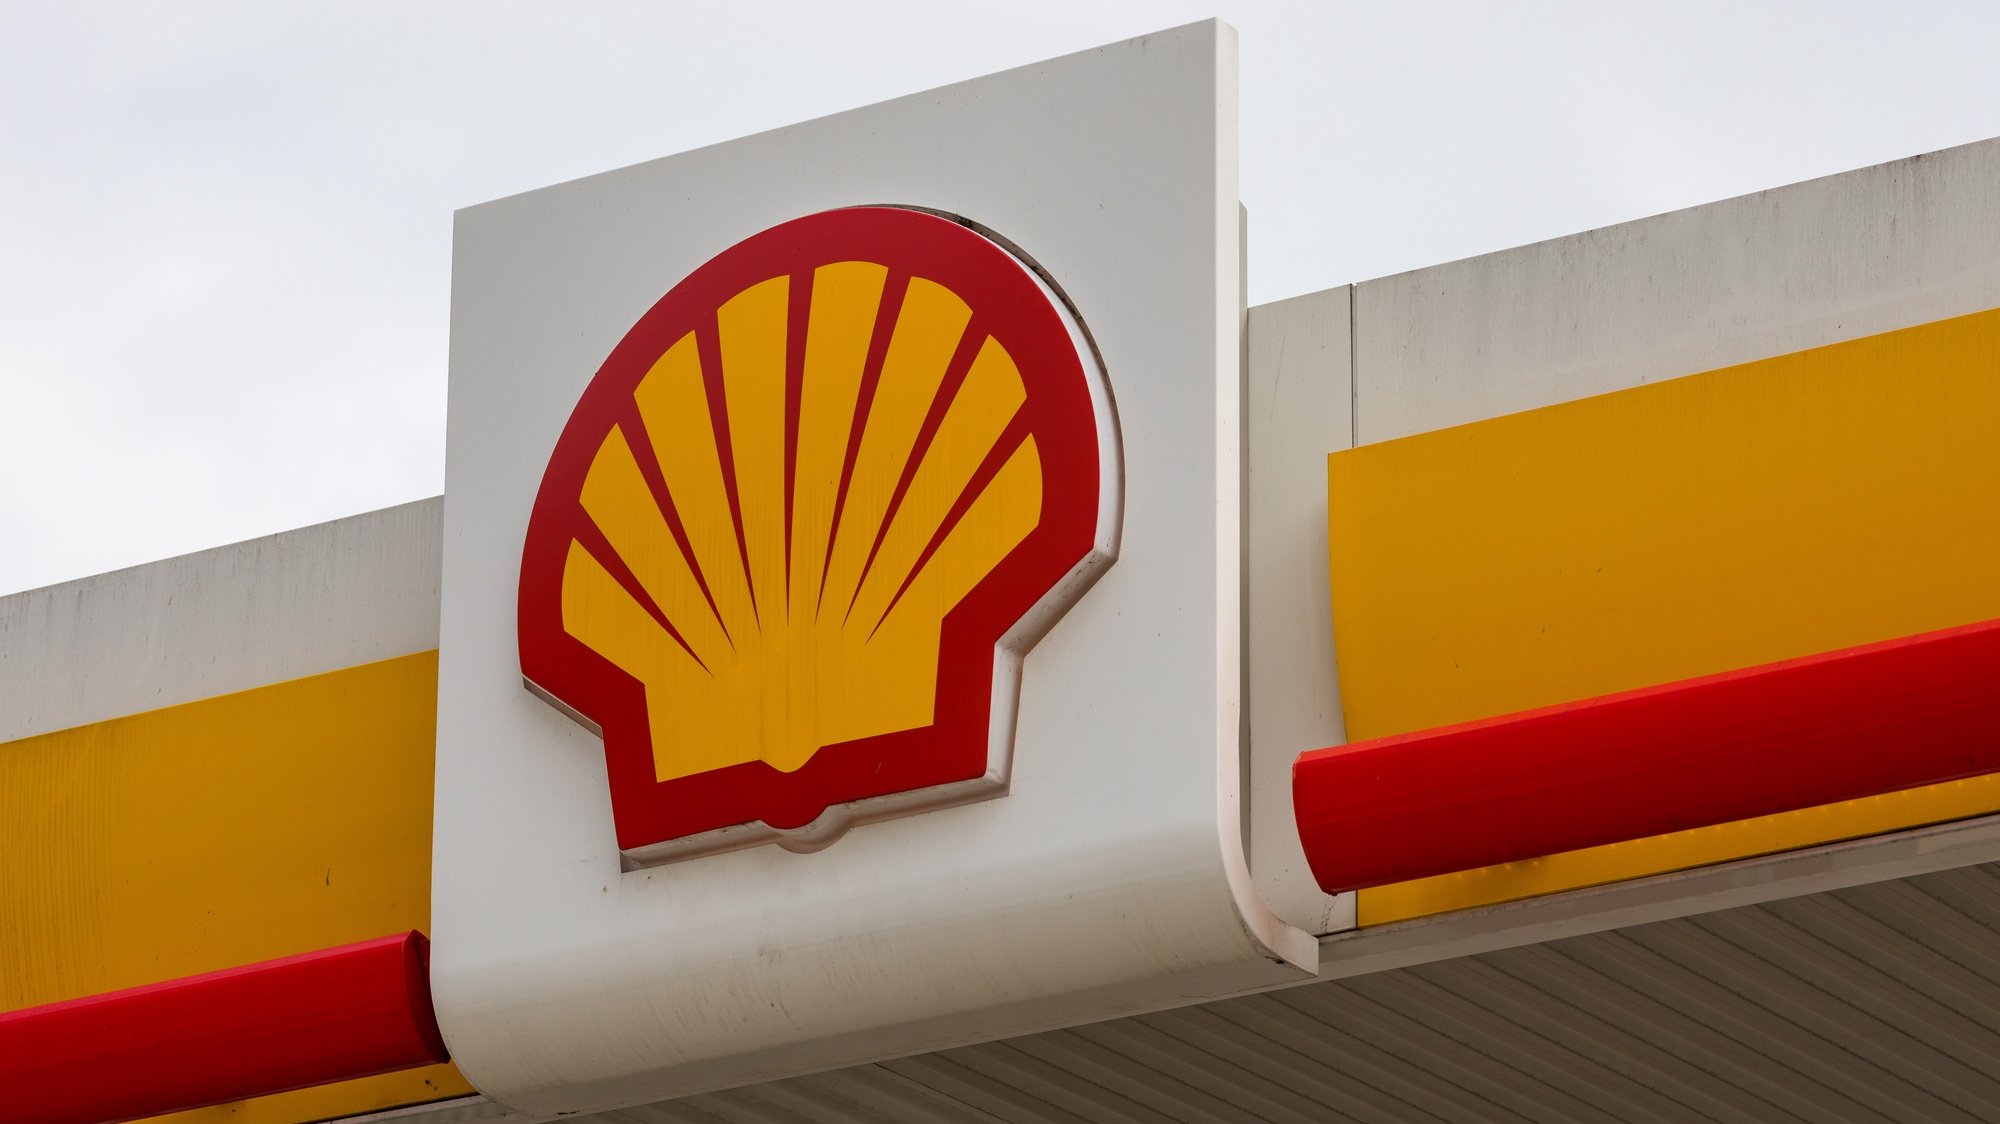 epa09457336 The Shell logo seen at a Shell petrol station in London, Britain, 09 September 2021. According to a report published by Carbon Tracker, the oil giants Shell and BP will need to cut their production by at least a third each to ensure that the planet does not heat up by more than 1.5 degrees Celsius.  EPA/VICKIE FLORES